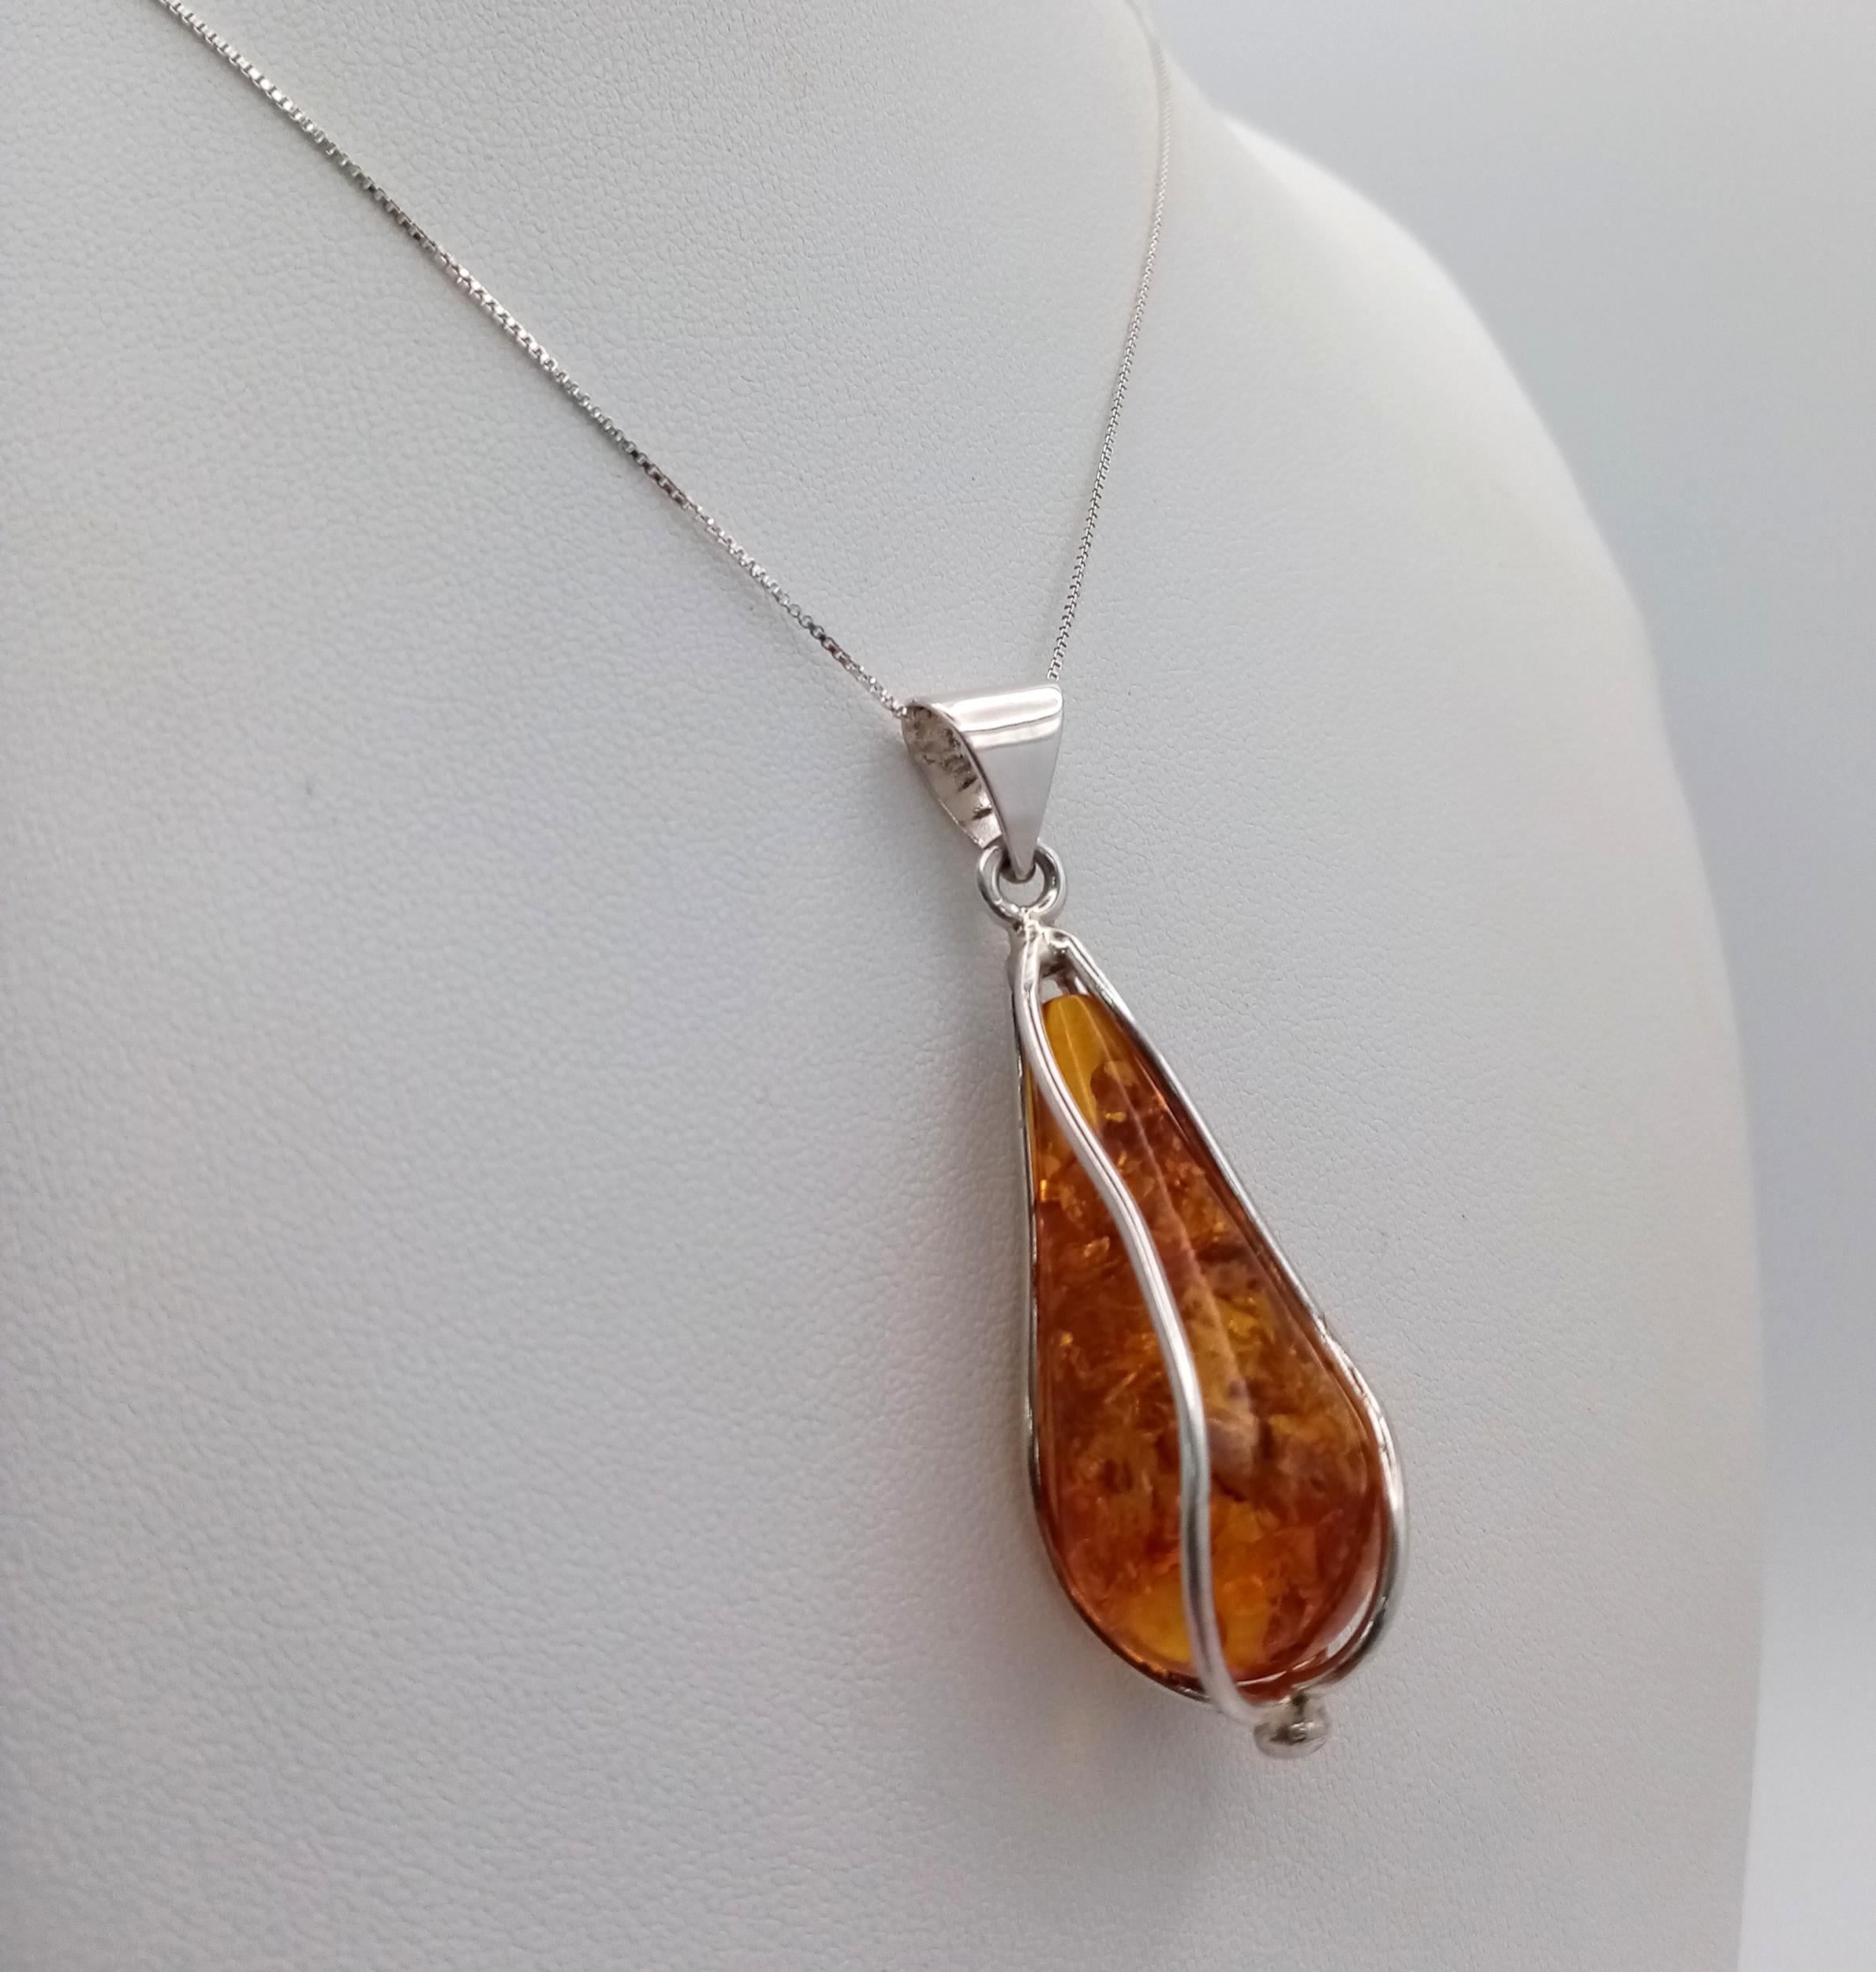 An Unworn, Fully Certified Limited Edition (1 of 50), Sterling Silver and Baltic Cognac Amber